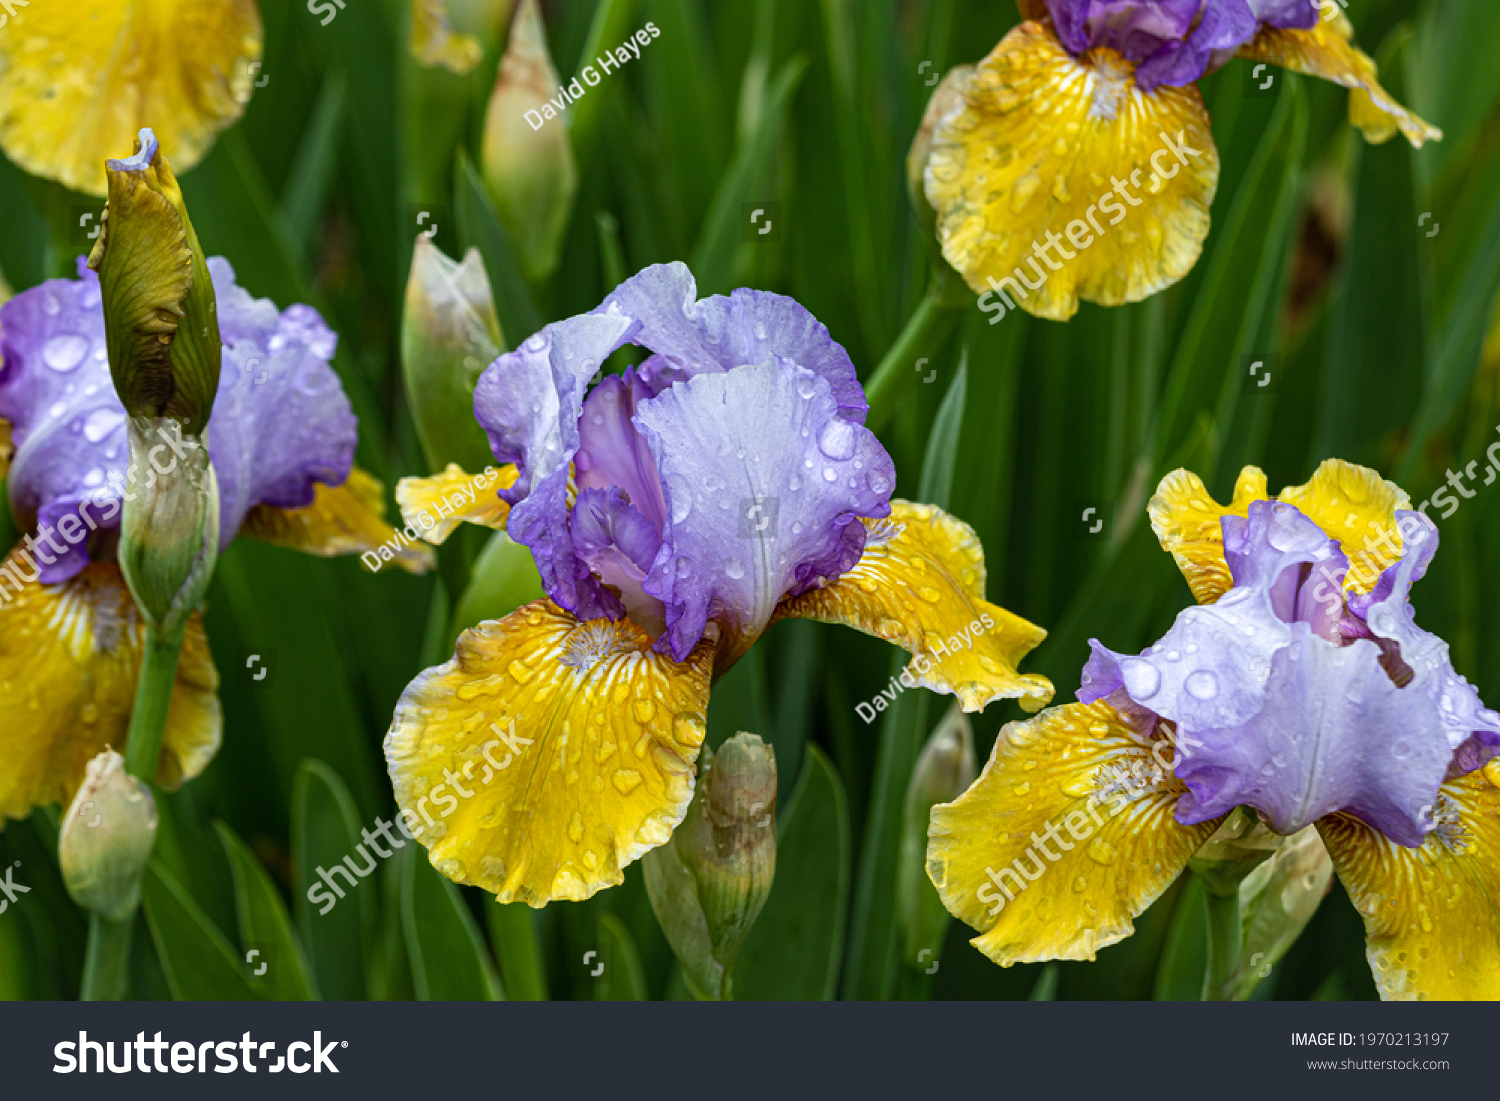 "Bold Statement" intermediate bearded iris in bloom. Raindrops on yellow and pastel blue-violet petals. Green plants in background. 
 #1970213197